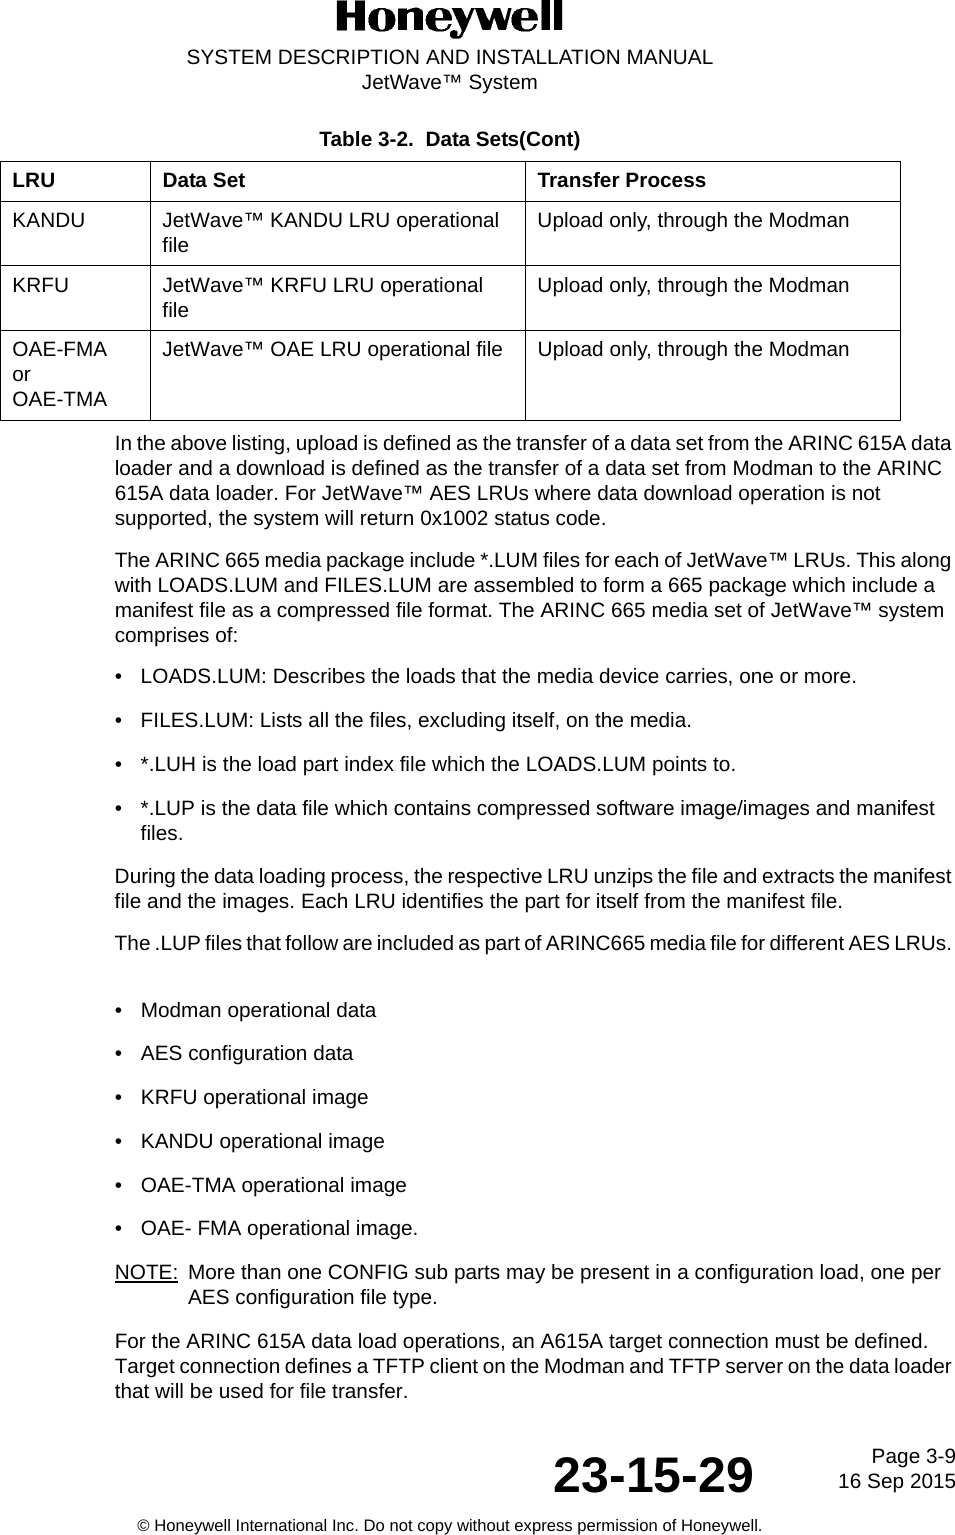 Page 3-916 Sep 201523-15-29SYSTEM DESCRIPTION AND INSTALLATION MANUALJetWave™ System© Honeywell International Inc. Do not copy without express permission of Honeywell.In the above listing, upload is defined as the transfer of a data set from the ARINC 615A data loader and a download is defined as the transfer of a data set from Modman to the ARINC 615A data loader. For JetWave™ AES LRUs where data download operation is not supported, the system will return 0x1002 status code. The ARINC 665 media package include *.LUM files for each of JetWave™ LRUs. This along with LOADS.LUM and FILES.LUM are assembled to form a 665 package which include a manifest file as a compressed file format. The ARINC 665 media set of JetWave™ system comprises of: • LOADS.LUM: Describes the loads that the media device carries, one or more. • FILES.LUM: Lists all the files, excluding itself, on the media. • *.LUH is the load part index file which the LOADS.LUM points to. • *.LUP is the data file which contains compressed software image/images and manifest files. During the data loading process, the respective LRU unzips the file and extracts the manifest file and the images. Each LRU identifies the part for itself from the manifest file. The .LUP files that follow are included as part of ARINC665 media file for different AES LRUs. • Modman operational data • AES configuration data• KRFU operational image • KANDU operational image • OAE-TMA operational image • OAE- FMA operational image.NOTE: More than one CONFIG sub parts may be present in a configuration load, one per AES configuration file type. For the ARINC 615A data load operations, an A615A target connection must be defined. Target connection defines a TFTP client on the Modman and TFTP server on the data loader that will be used for file transfer. KANDU JetWave™ KANDU LRU operational file Upload only, through the ModmanKRFU JetWave™ KRFU LRU operational file Upload only, through the ModmanOAE-FMAorOAE-TMAJetWave™ OAE LRU operational file Upload only, through the ModmanTable 3-2.  Data Sets(Cont)LRU Data Set Transfer Process